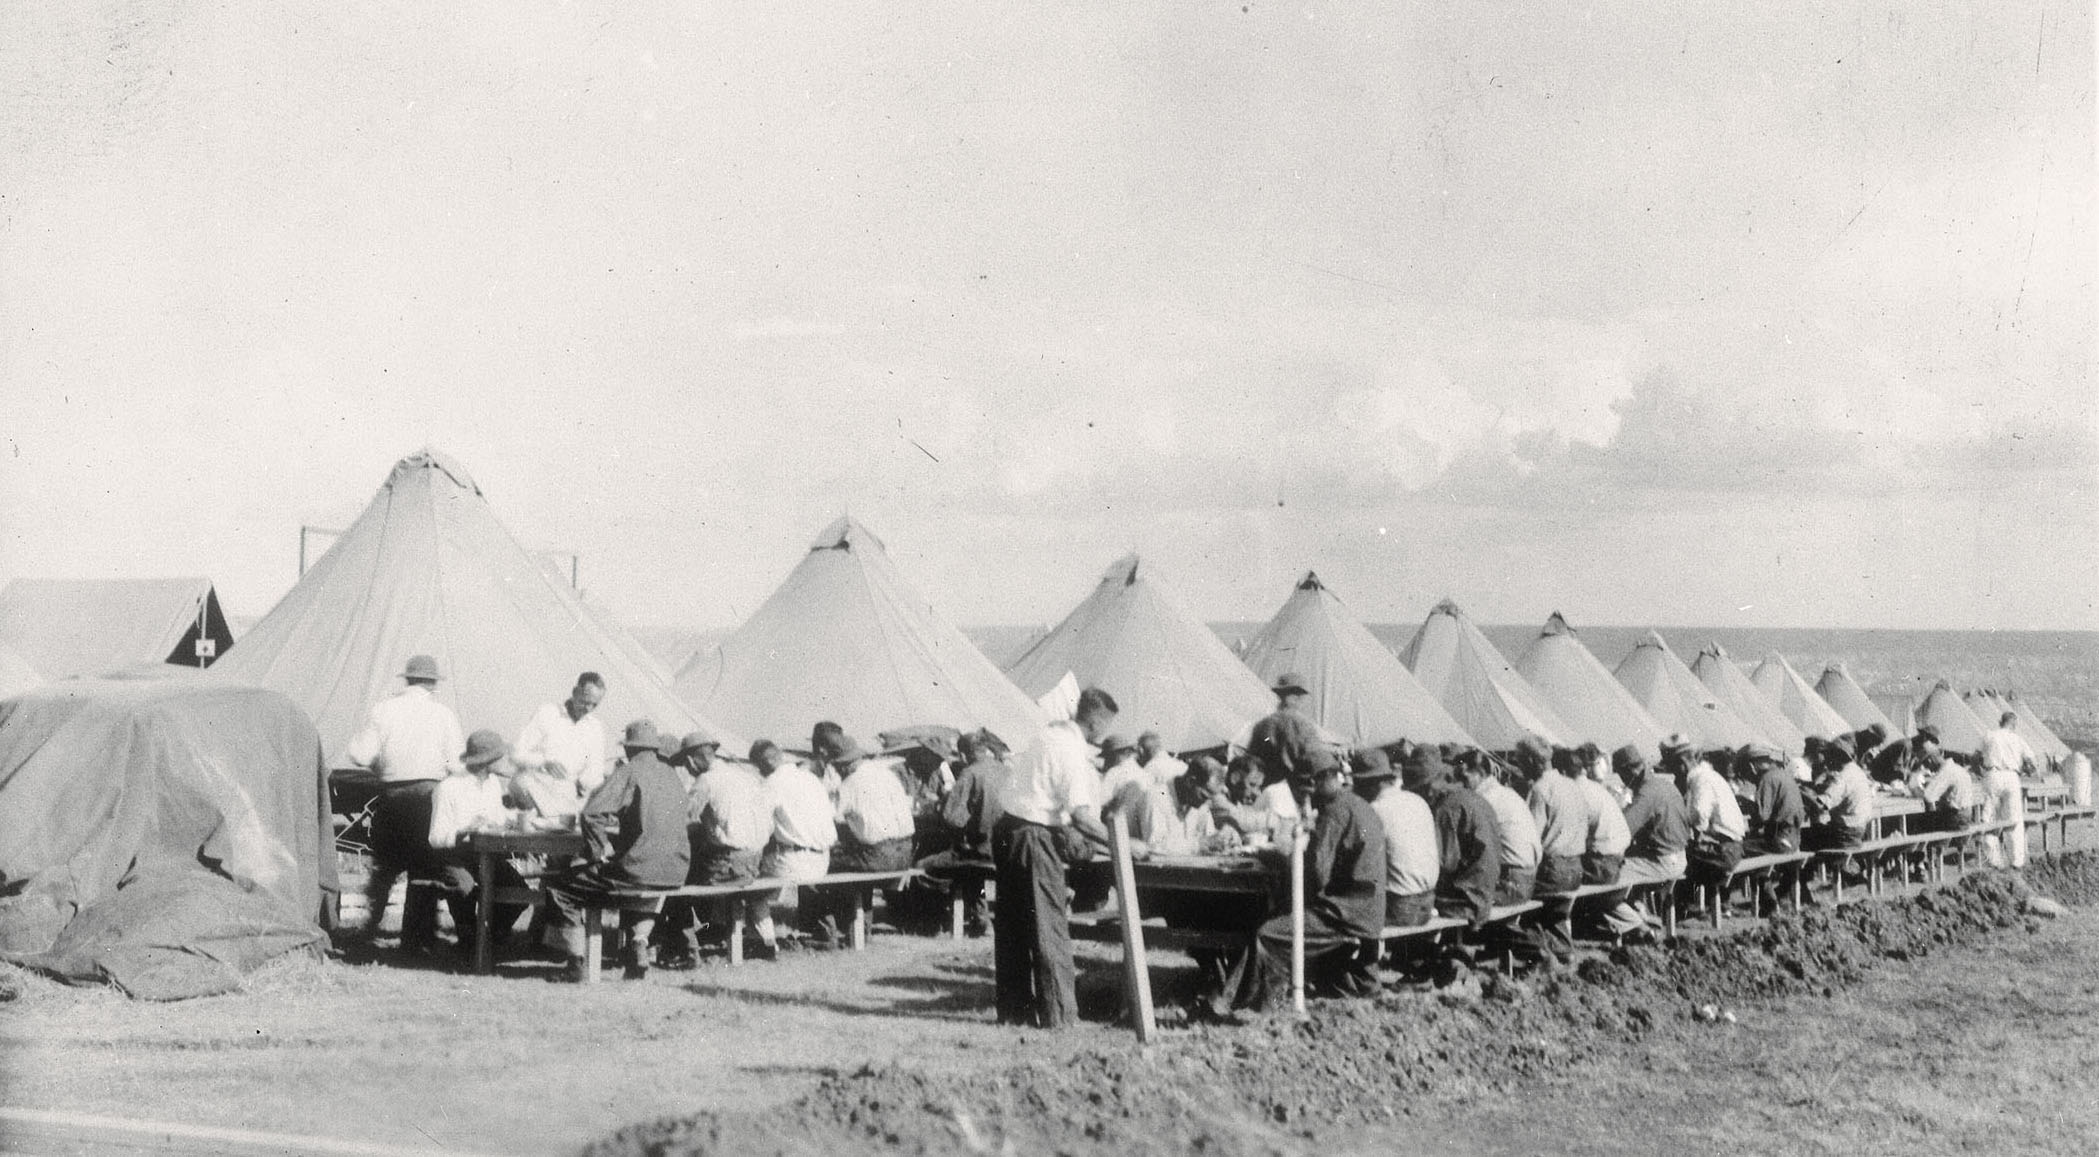 A group of people in white shirts sit at long tables next to tents outdoors